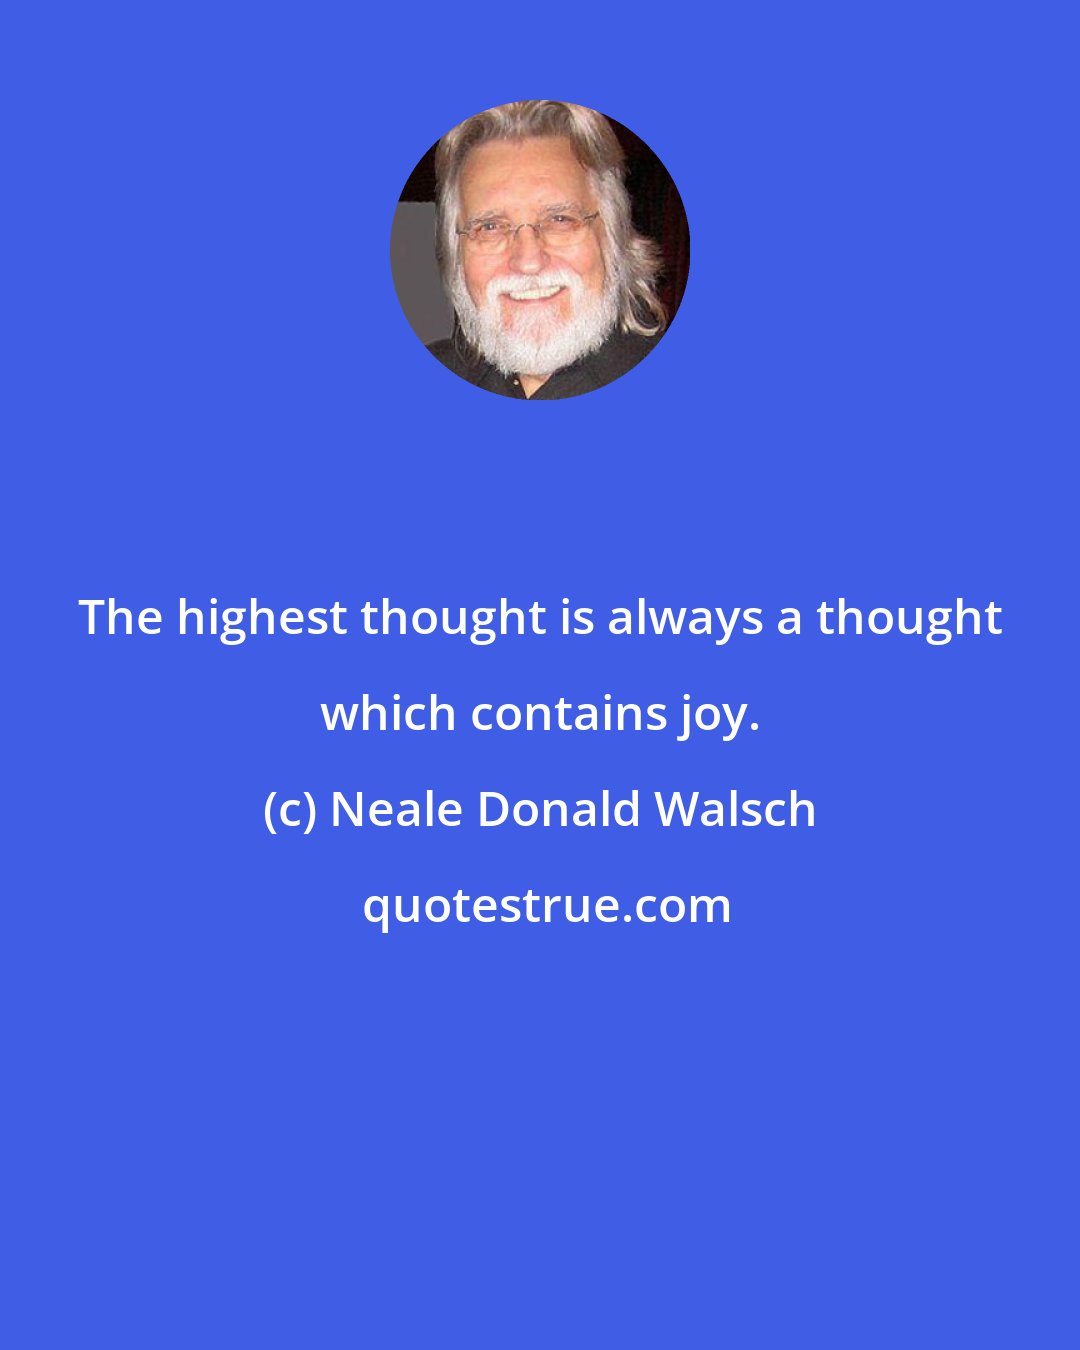 Neale Donald Walsch: The highest thought is always a thought which contains joy.